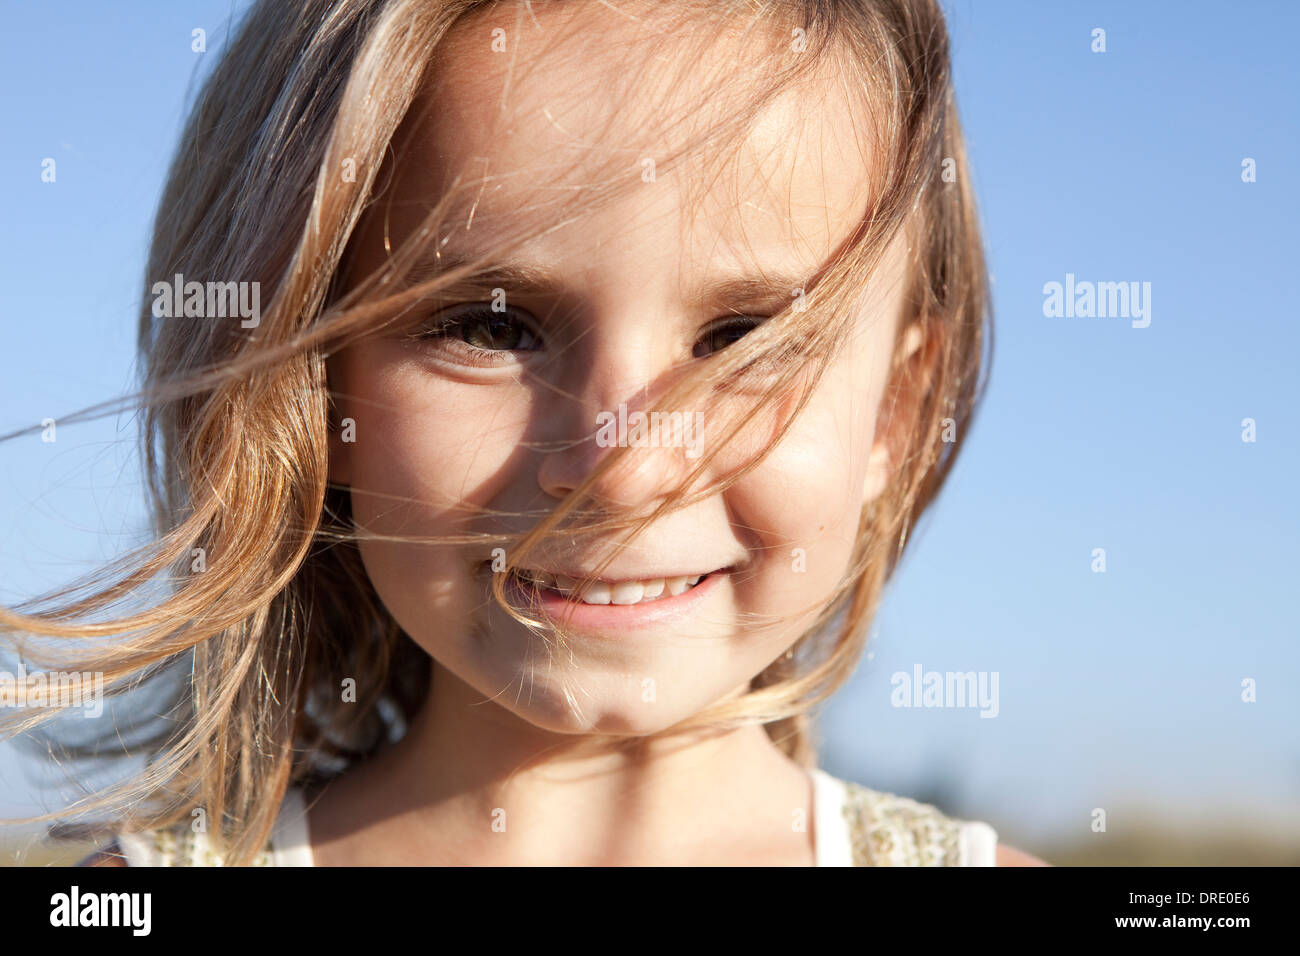 Young girl with hair blowing in her face Stock Photo